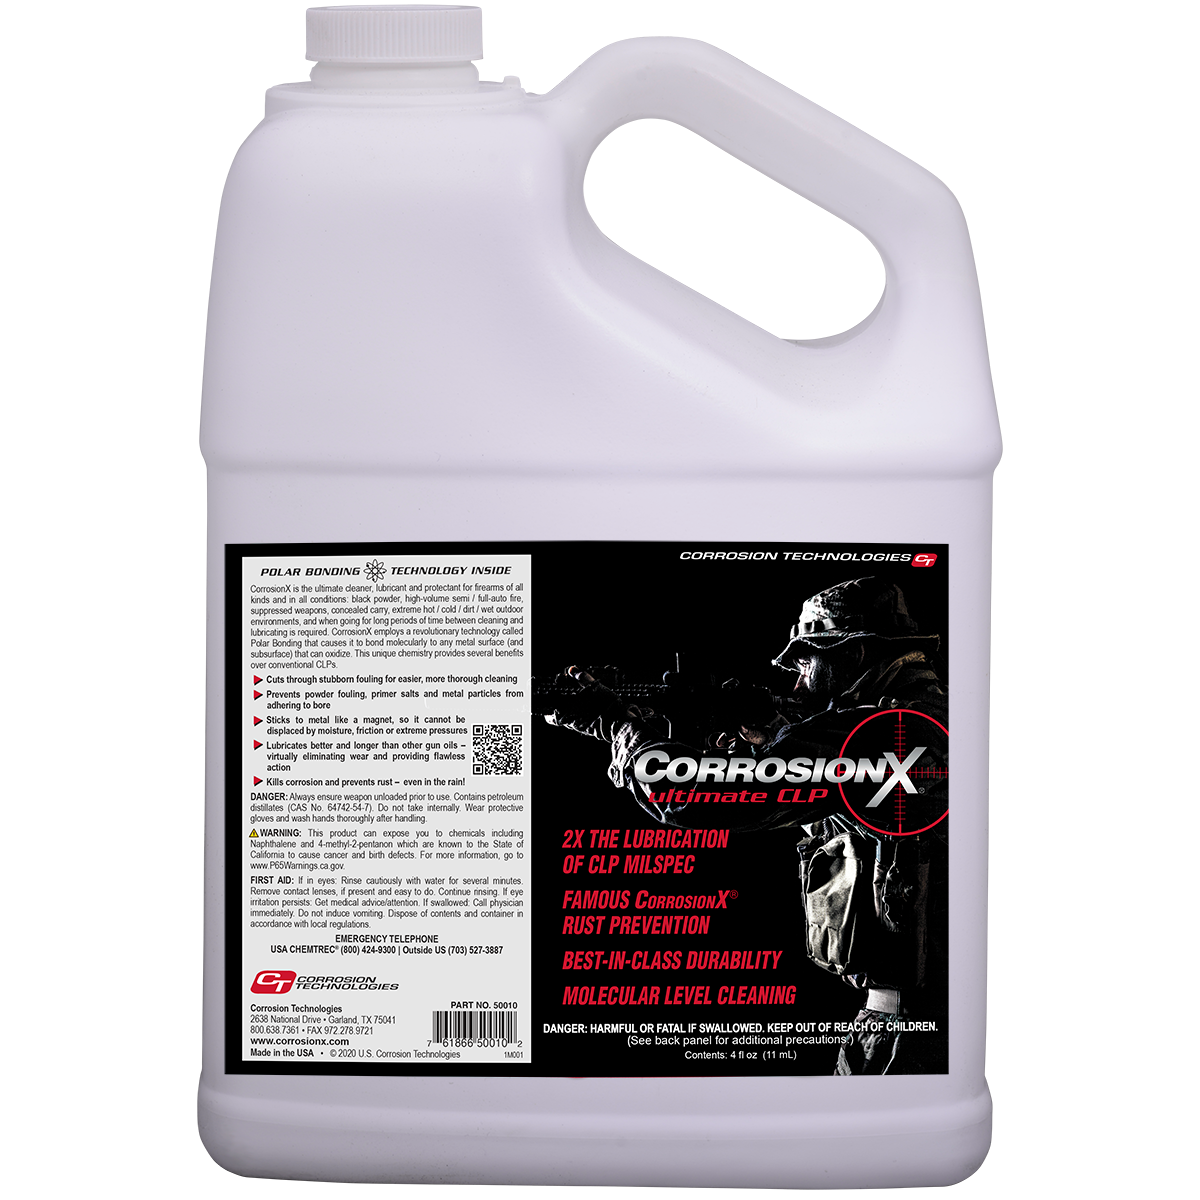 CorrosionX Ultimate CLP cleaner lubricant and protectant for firearms